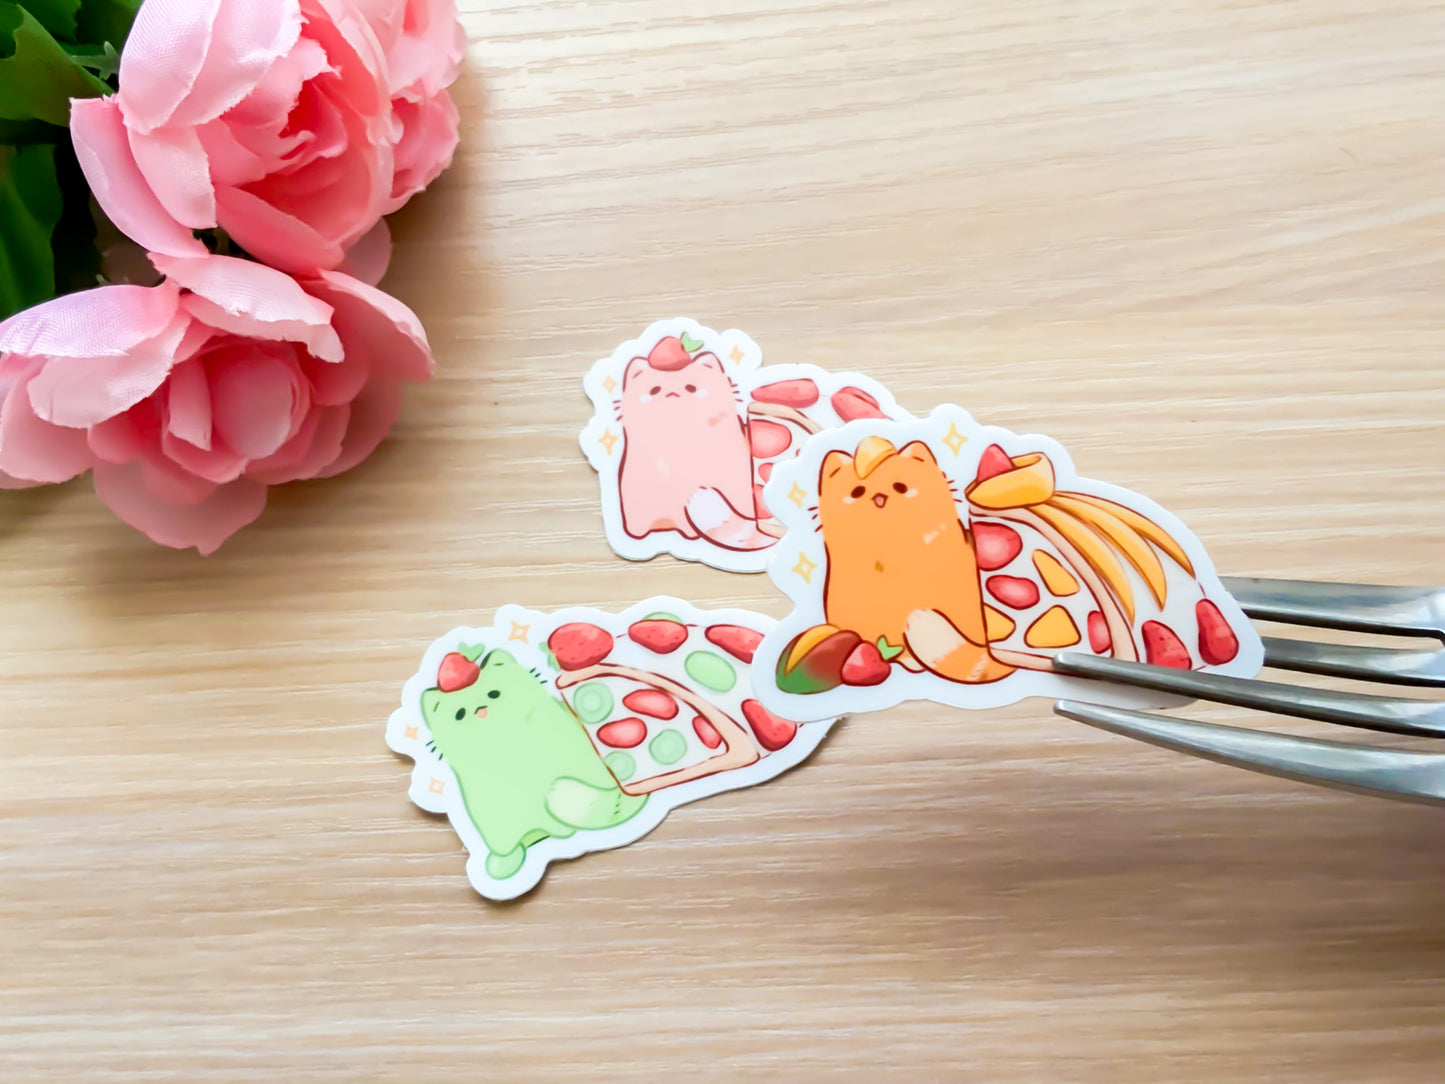 Sticker - Cake Cat Collection